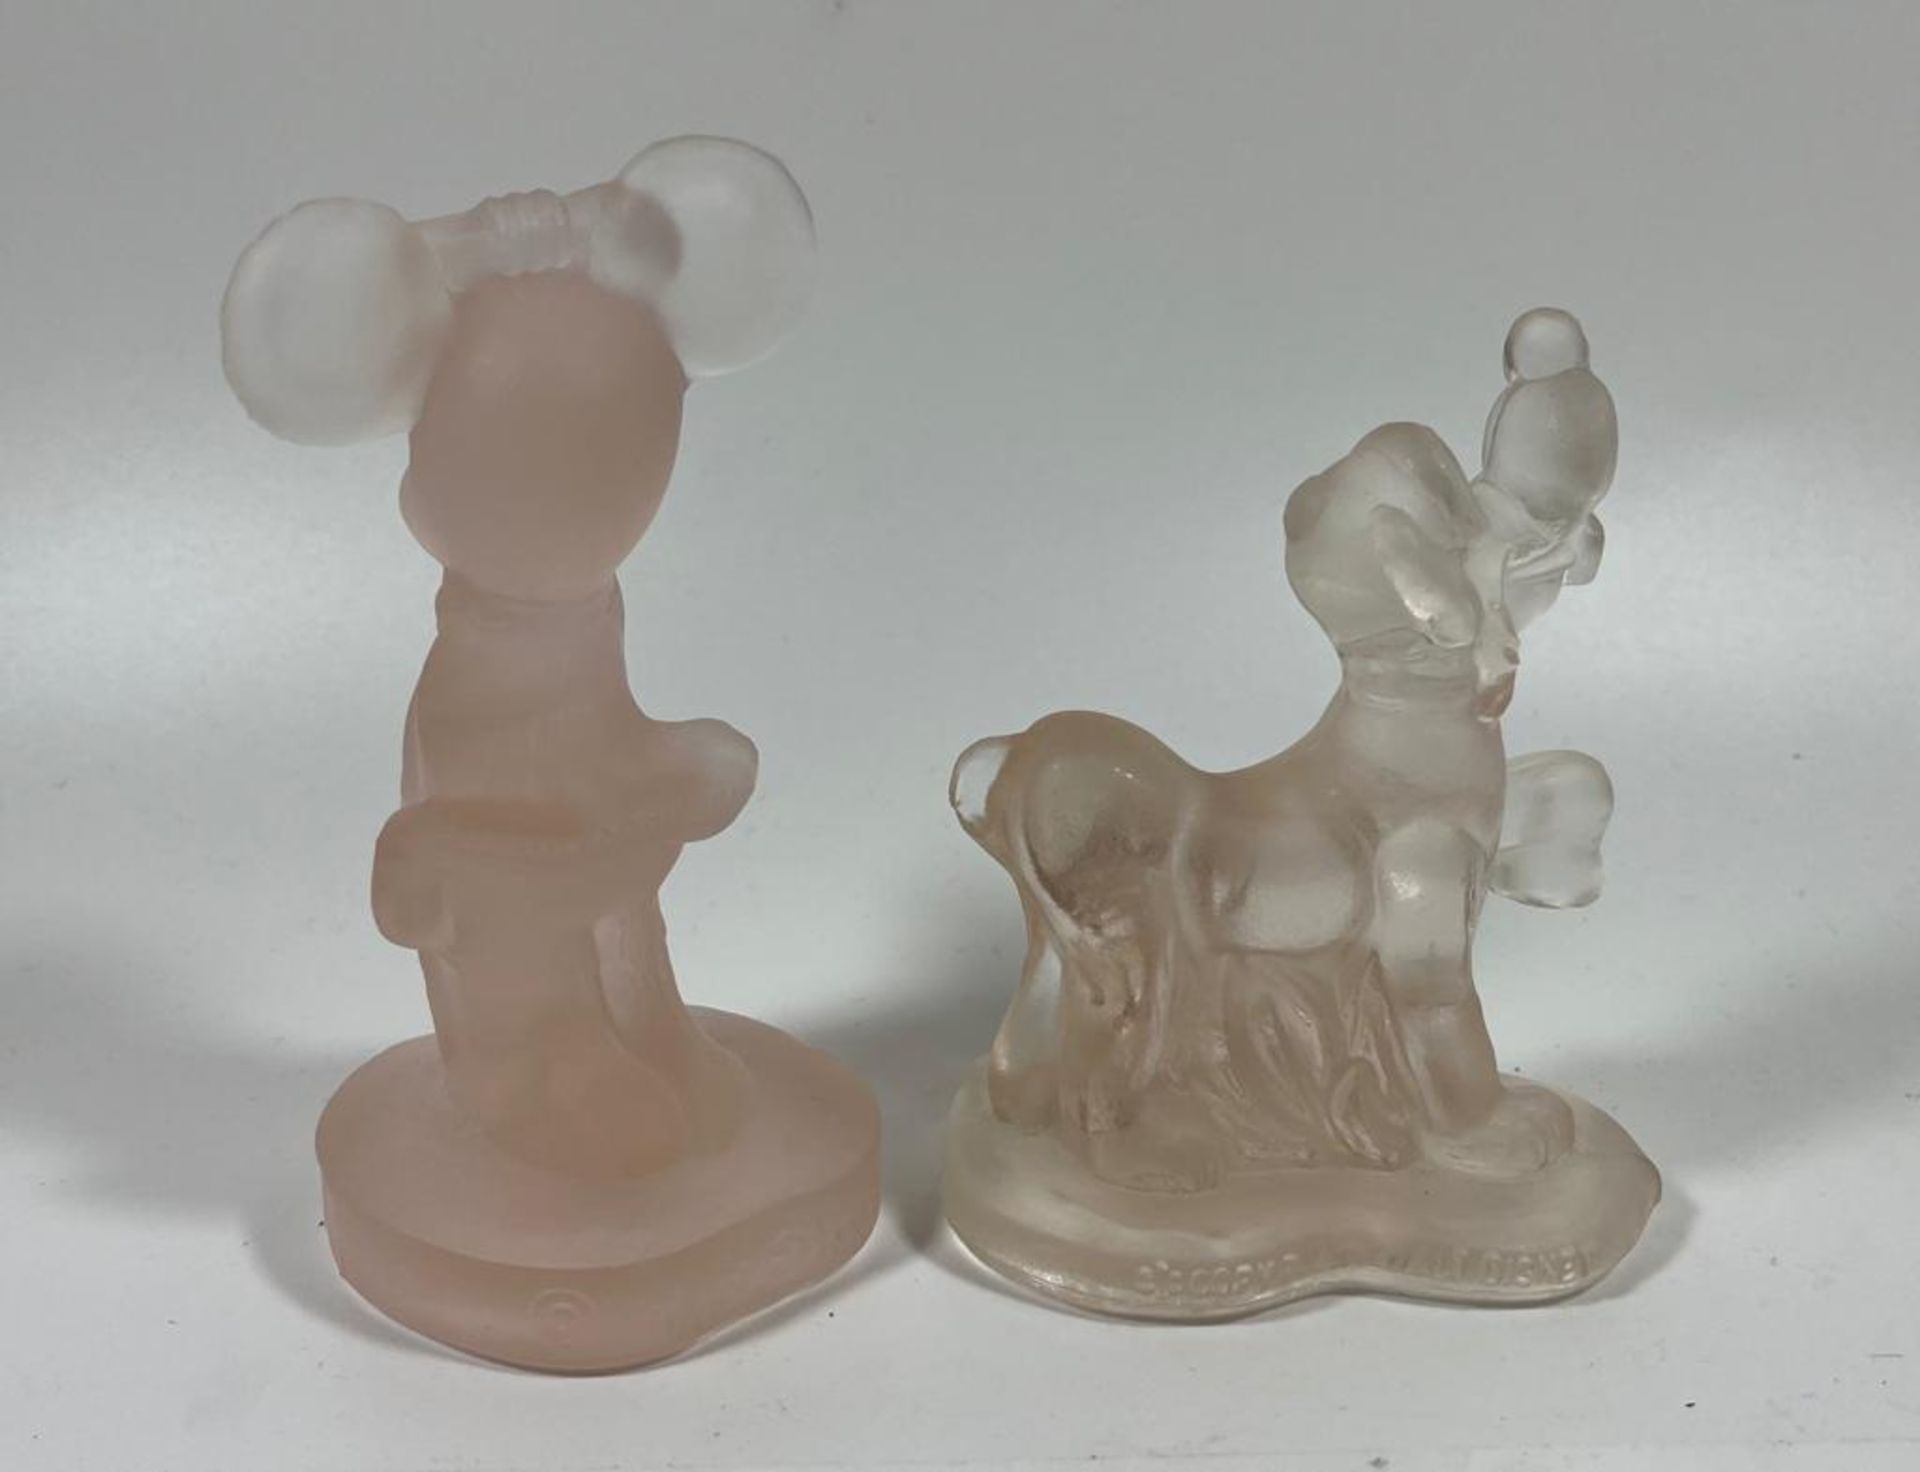 TWO VINTAGE WALT DISNEY PRODUCTIONS PINK FROSTED GLASS FIGURES - MINNIE MOUSE & PLUTO - Image 2 of 3